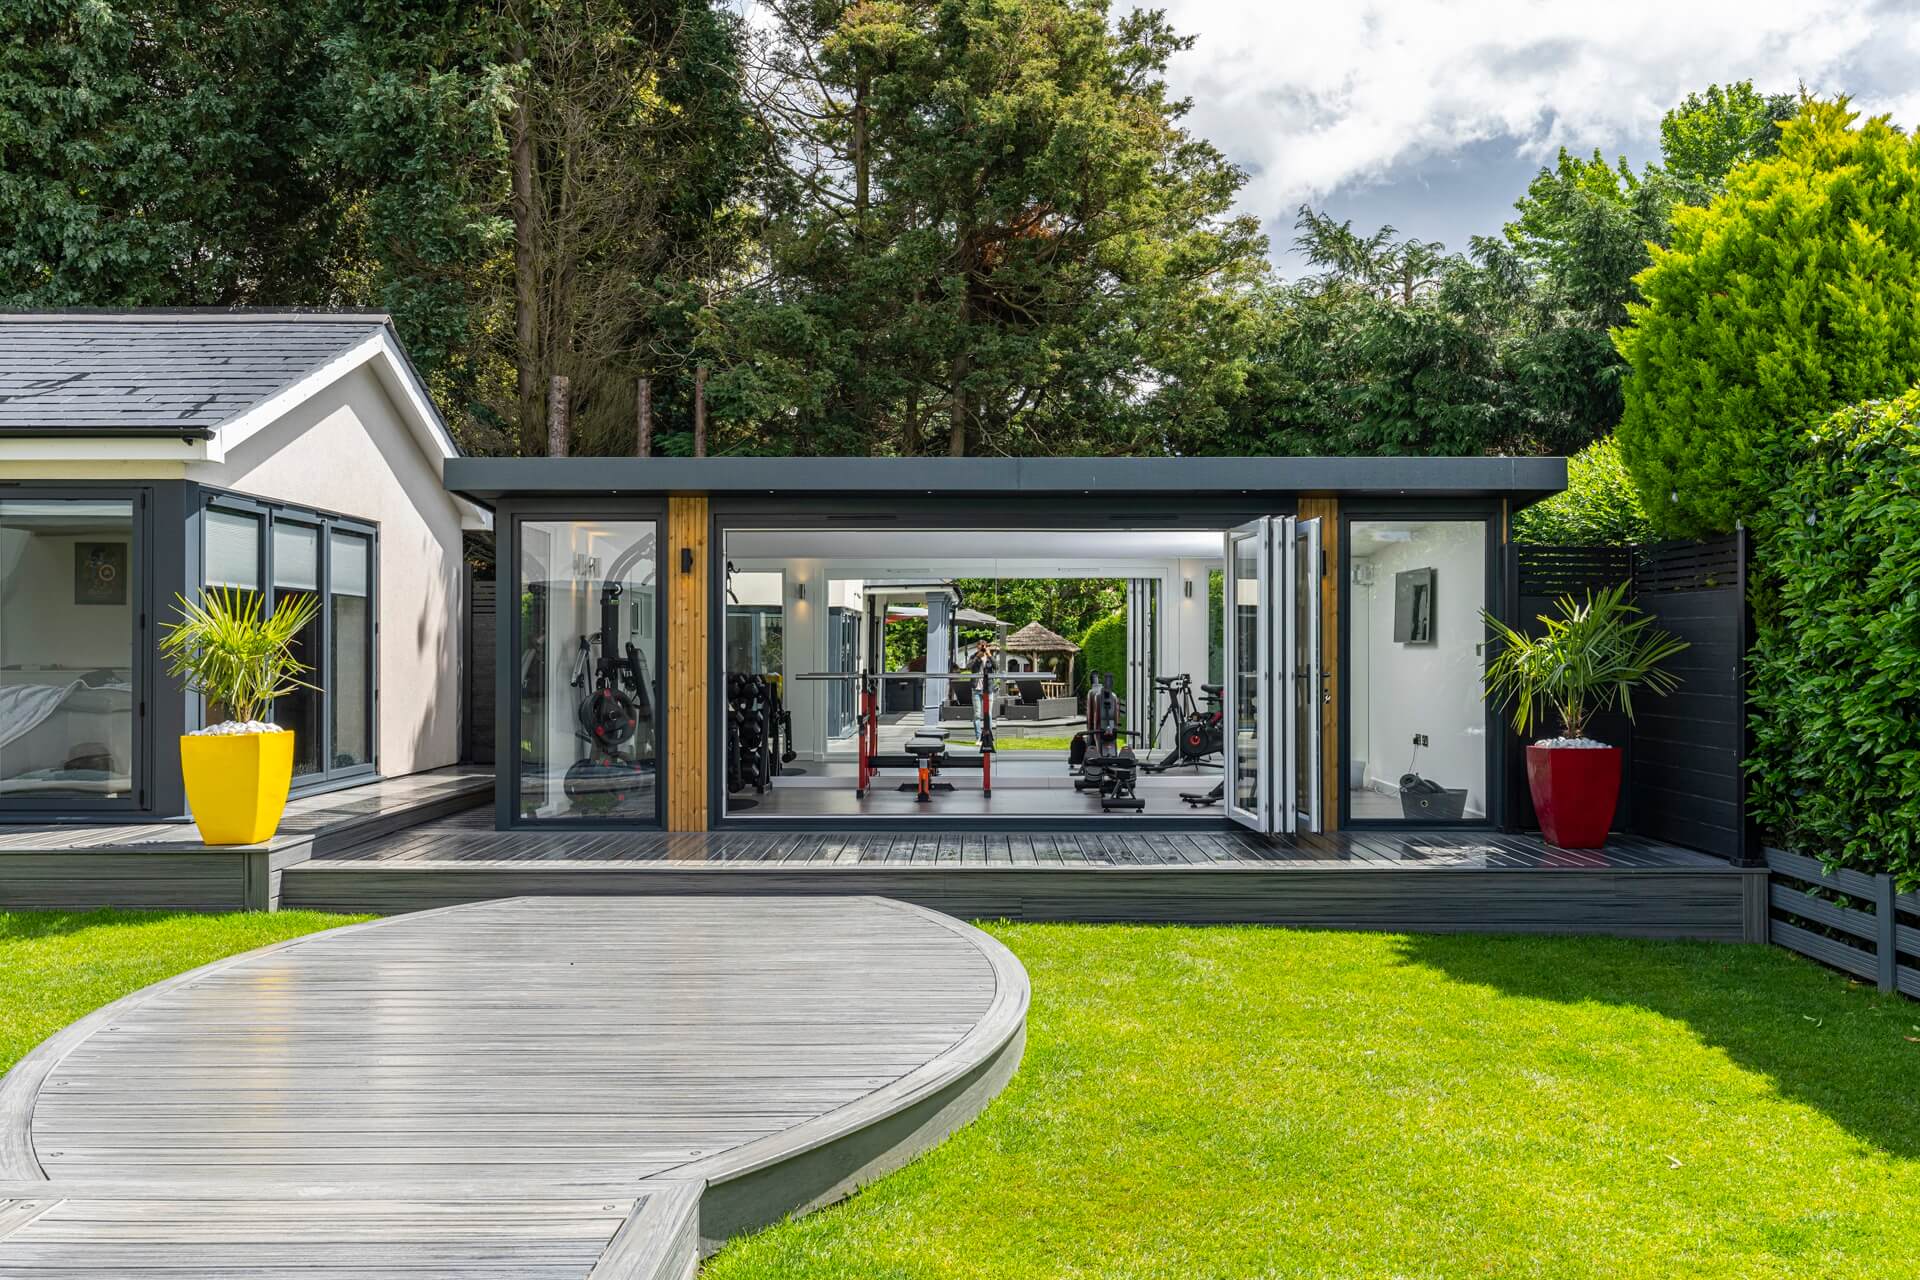 Home Gyms & Garden Gyms, Space for Health